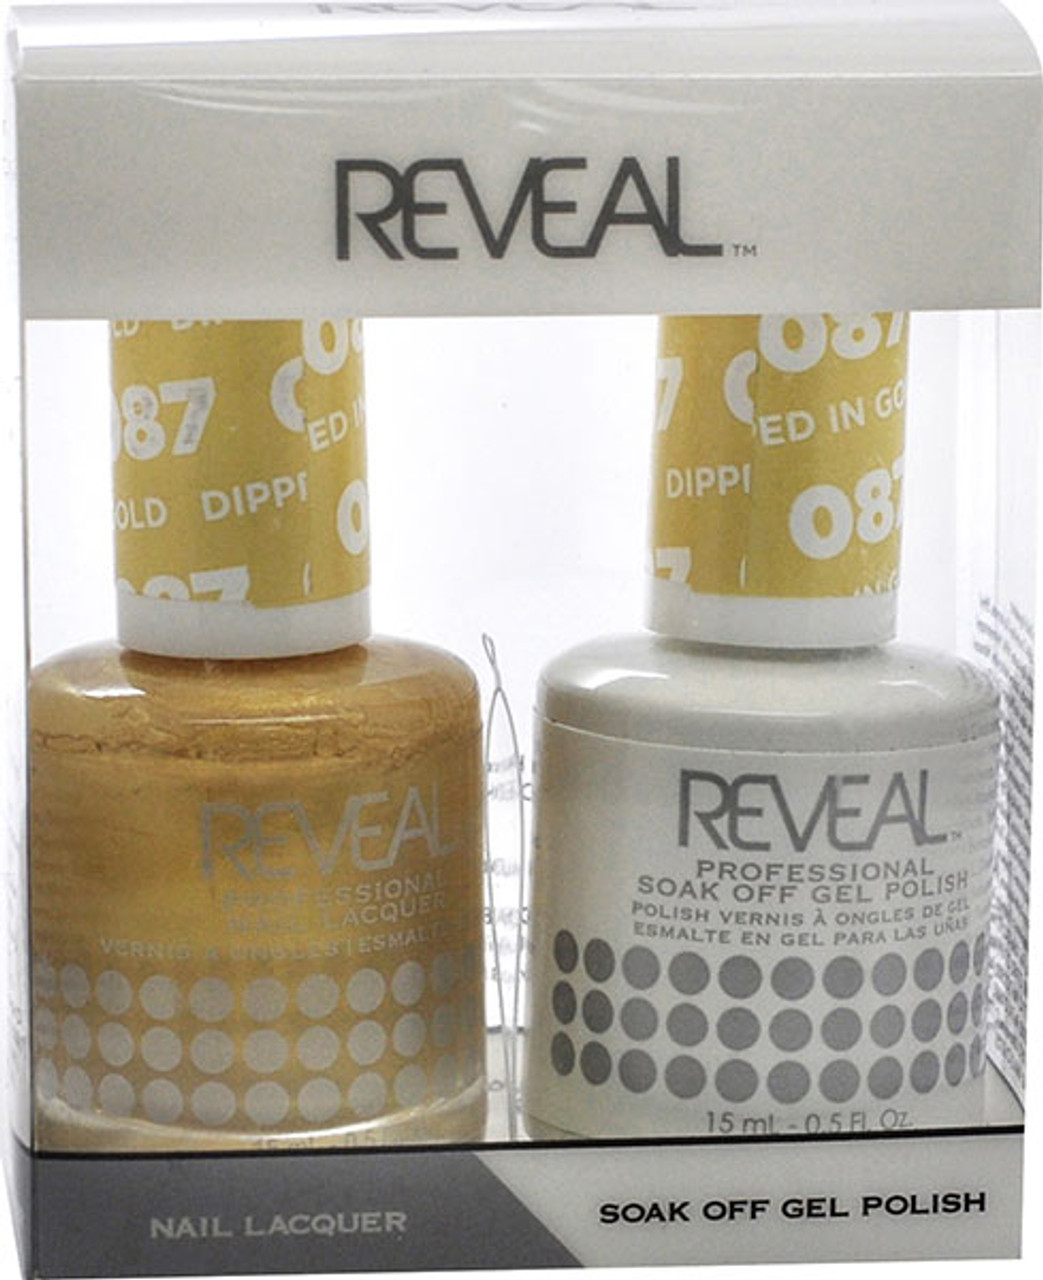 Reveal Gel Polish & Nail Lacquer Matching Duo - DIPPED IN GOLD - .5 oz